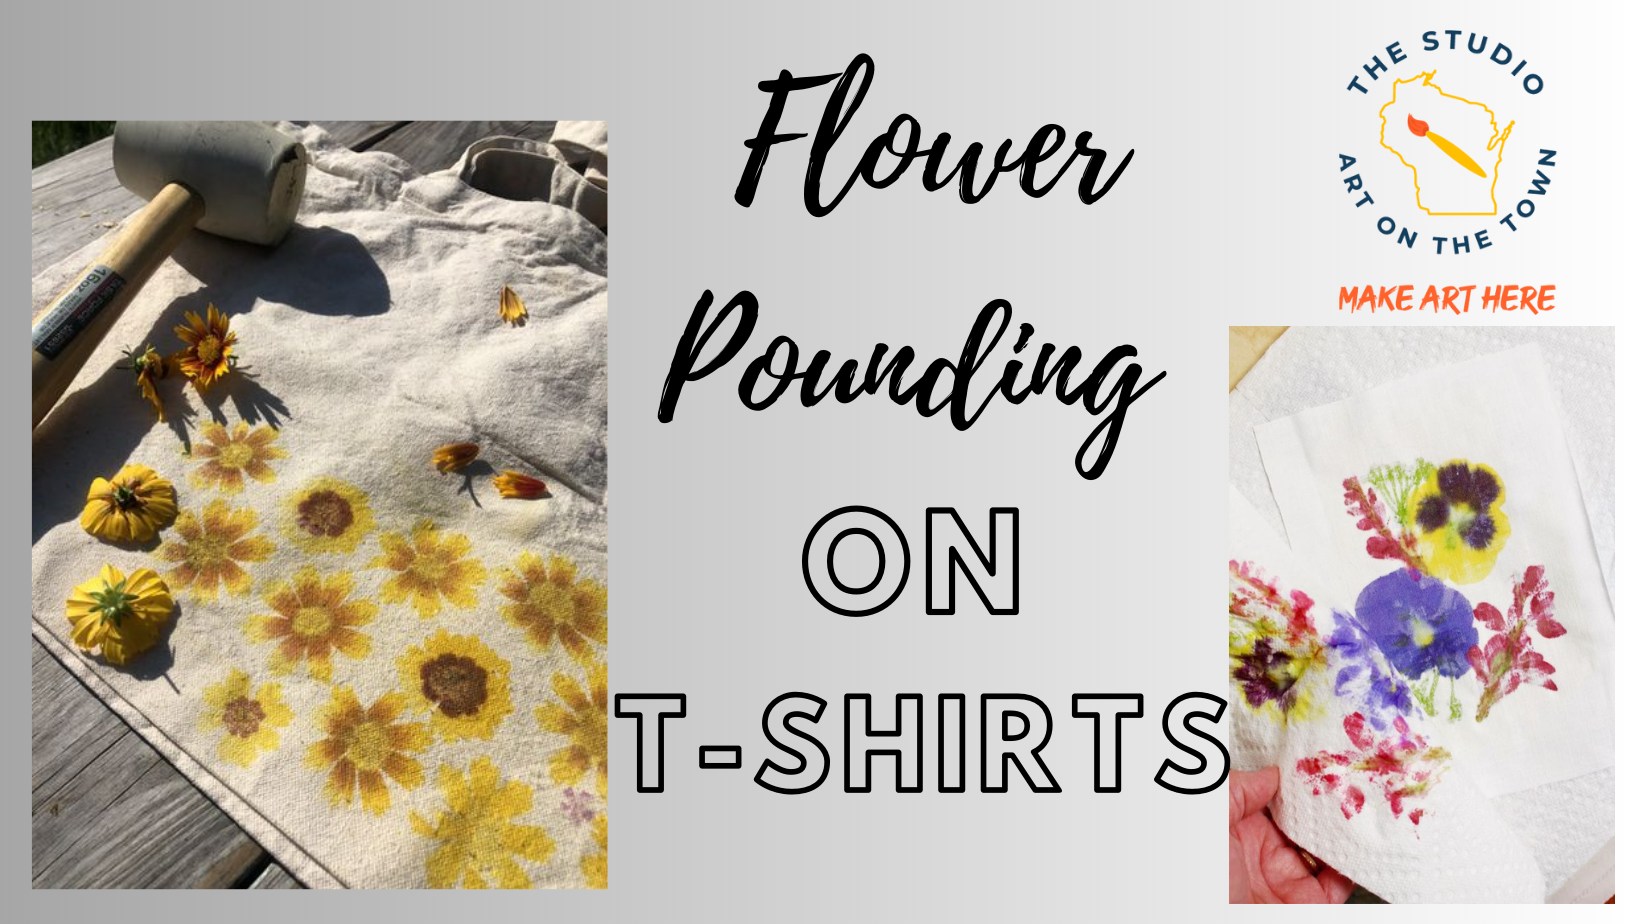 Flower Pounding on T Shirts